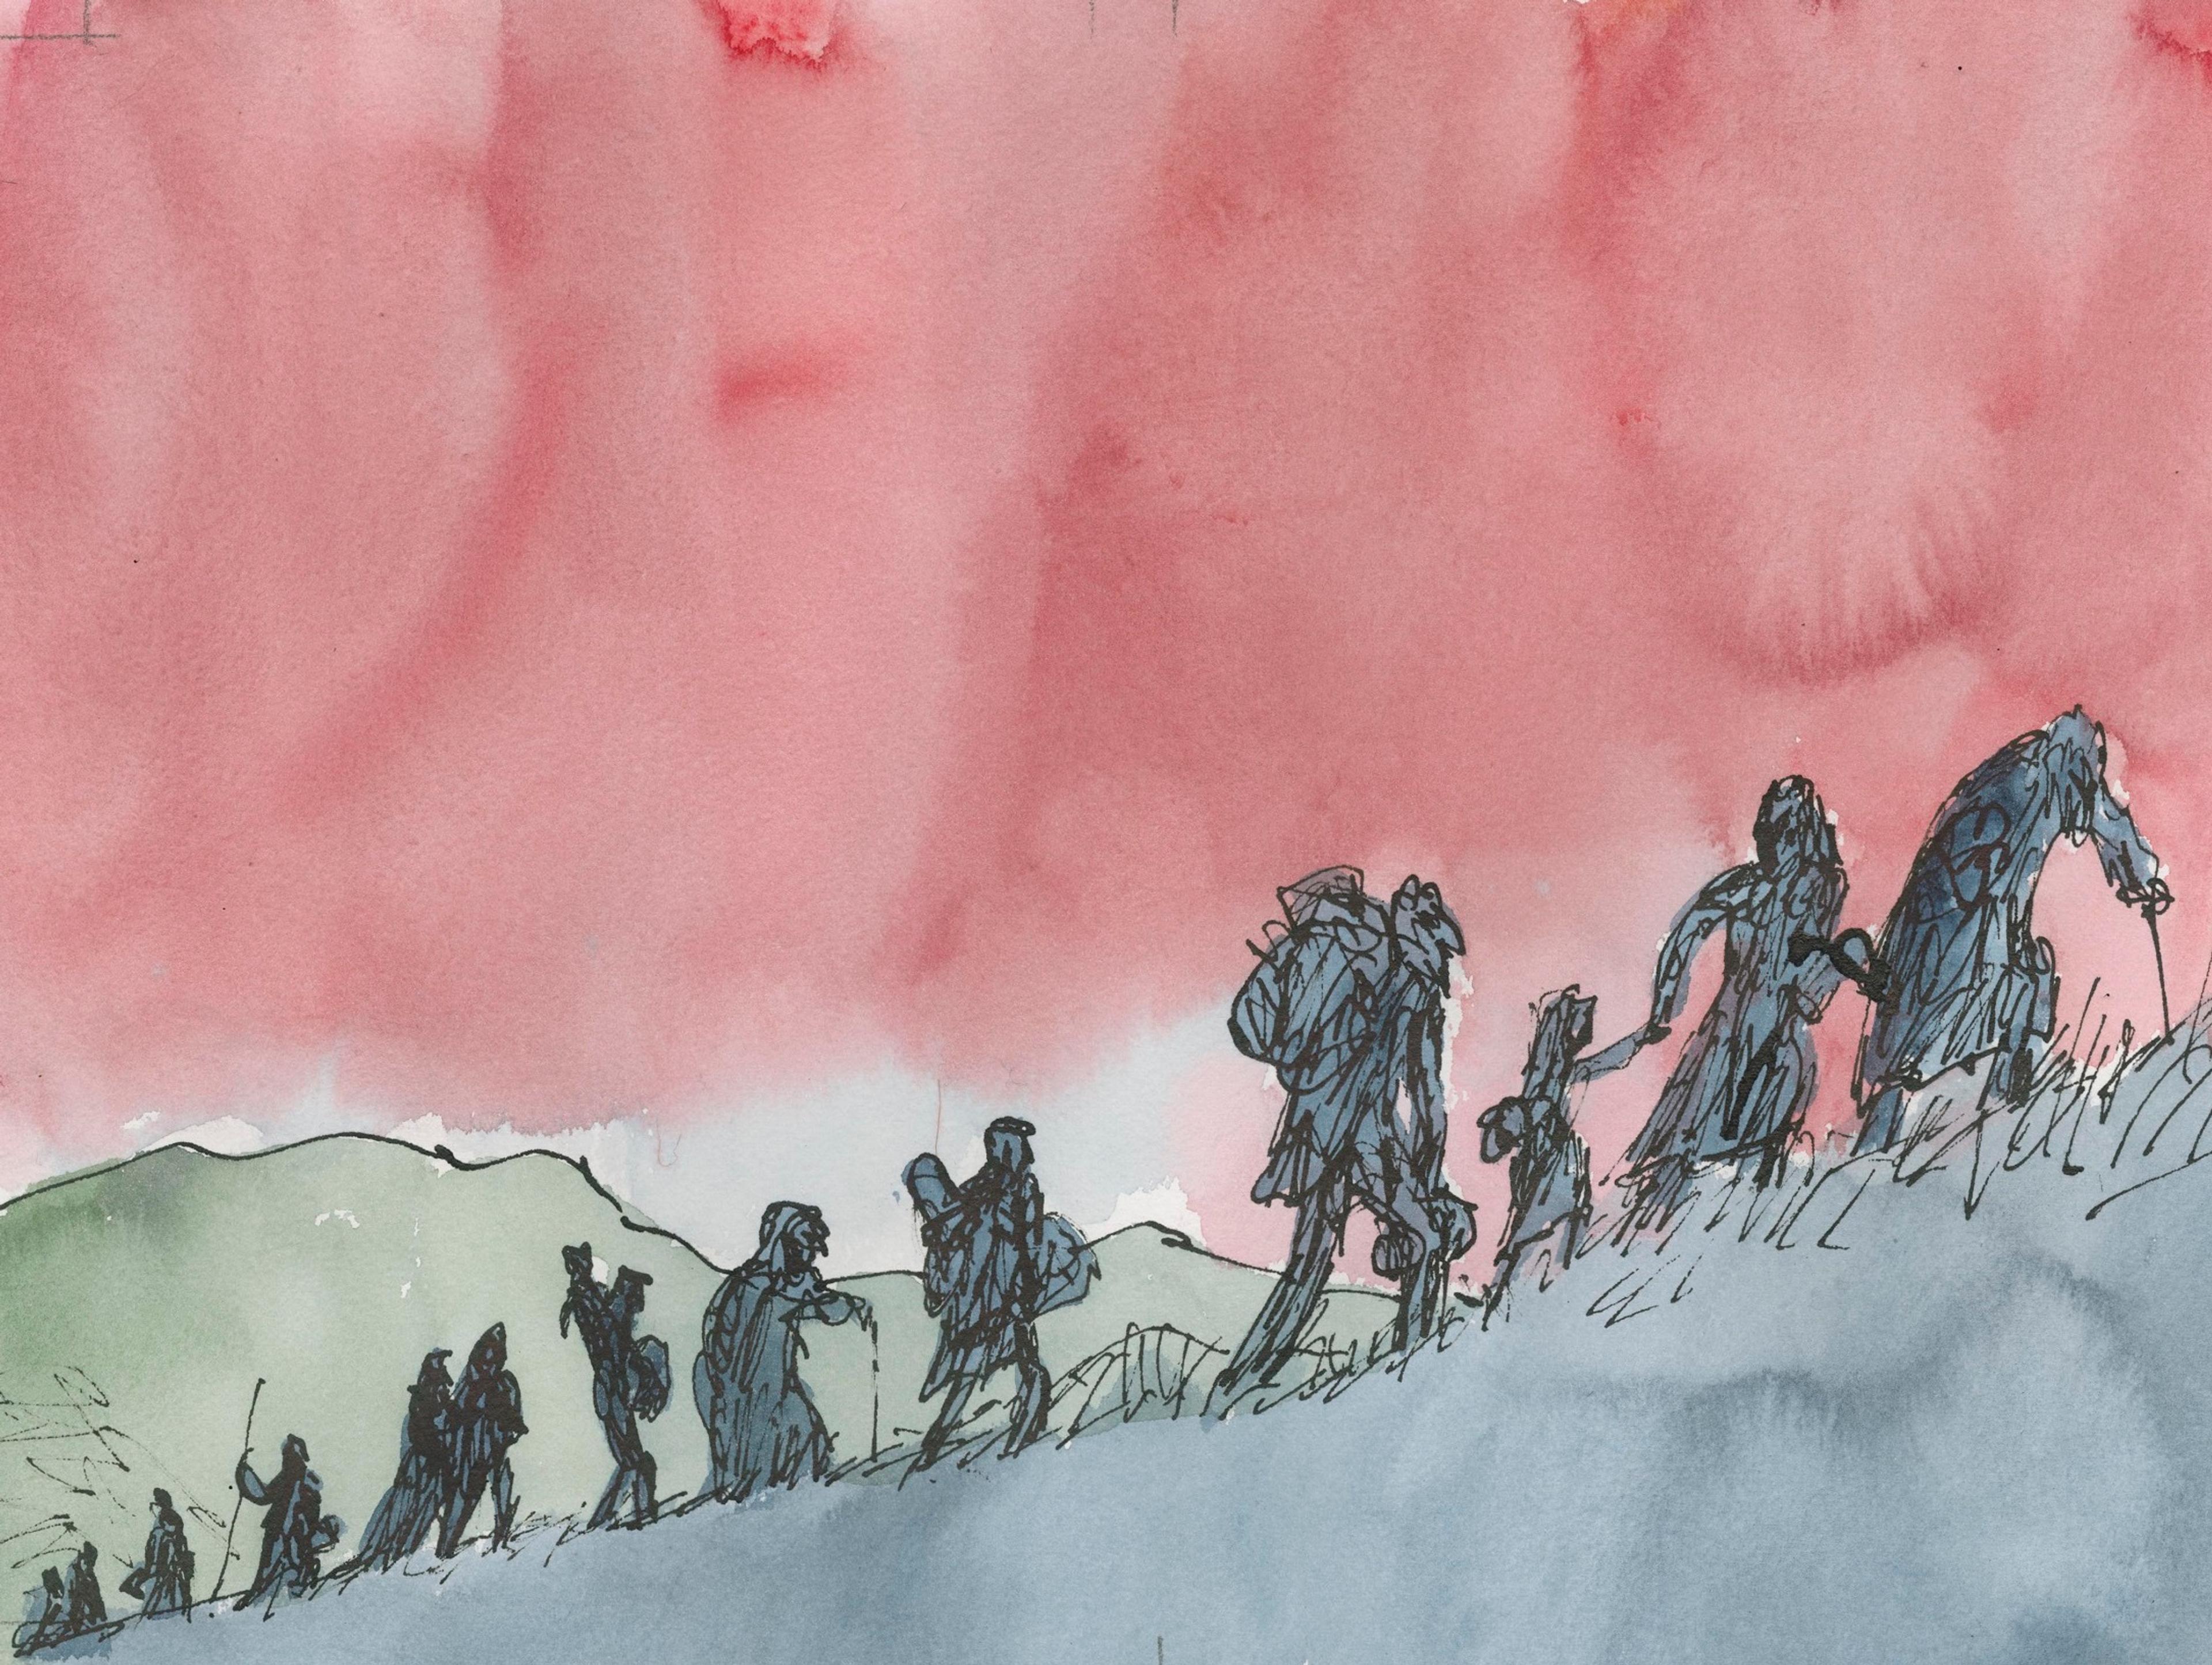 Illustration of a line of people carrying bags, walking up a steep mountain under a red sky.